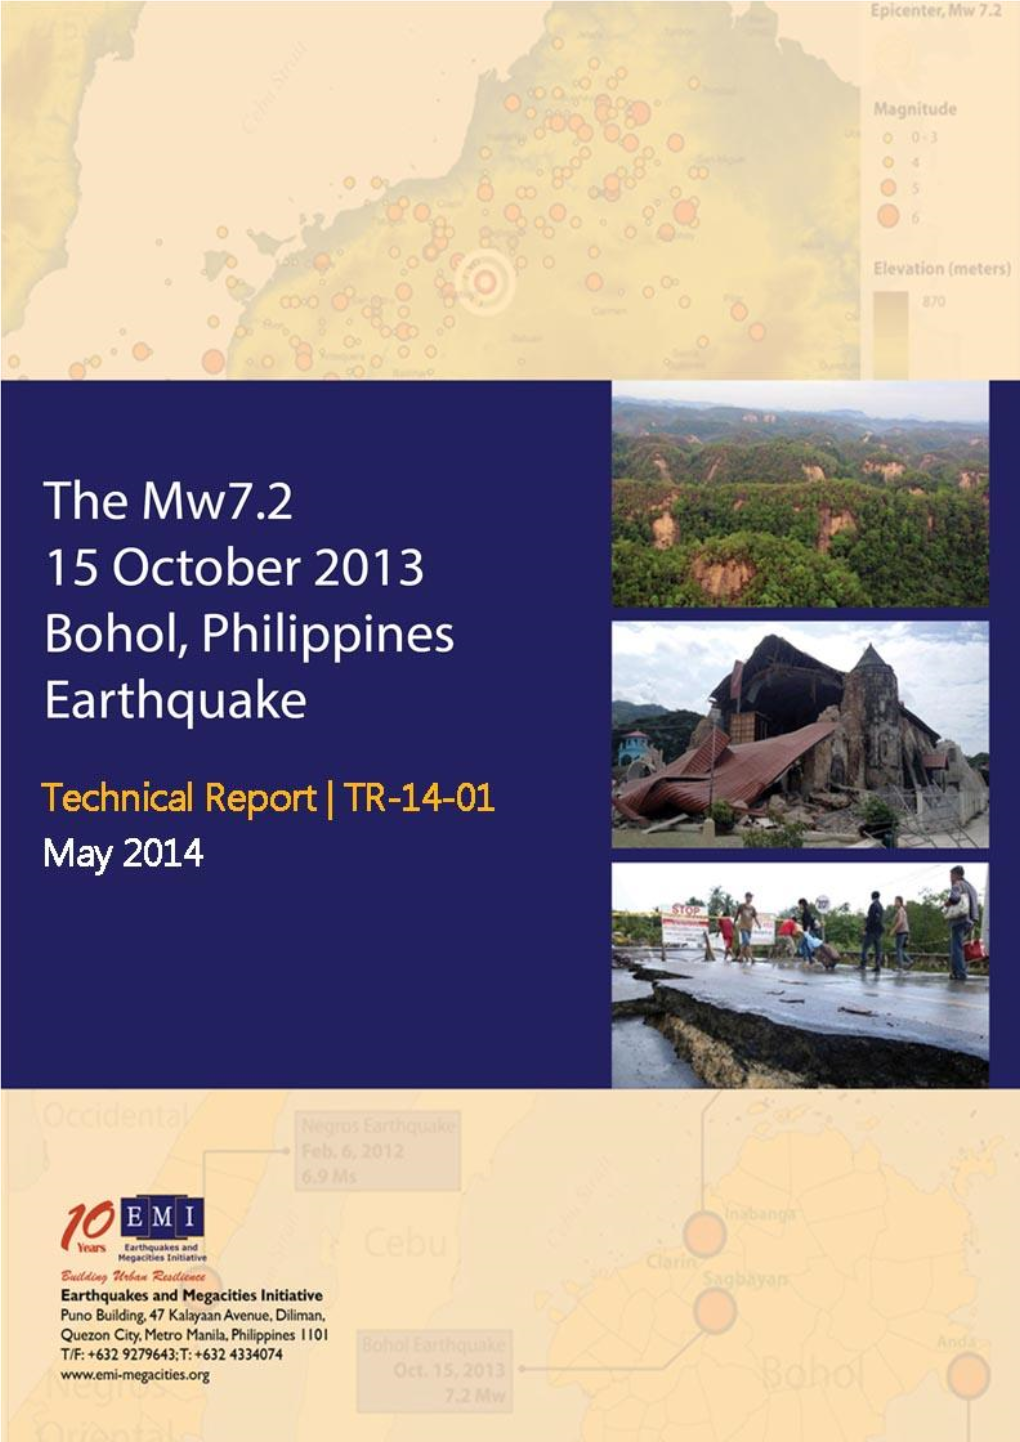 The Mw7.2 15 October 2013 Bohol, Philippines Earthquake: Technical Report